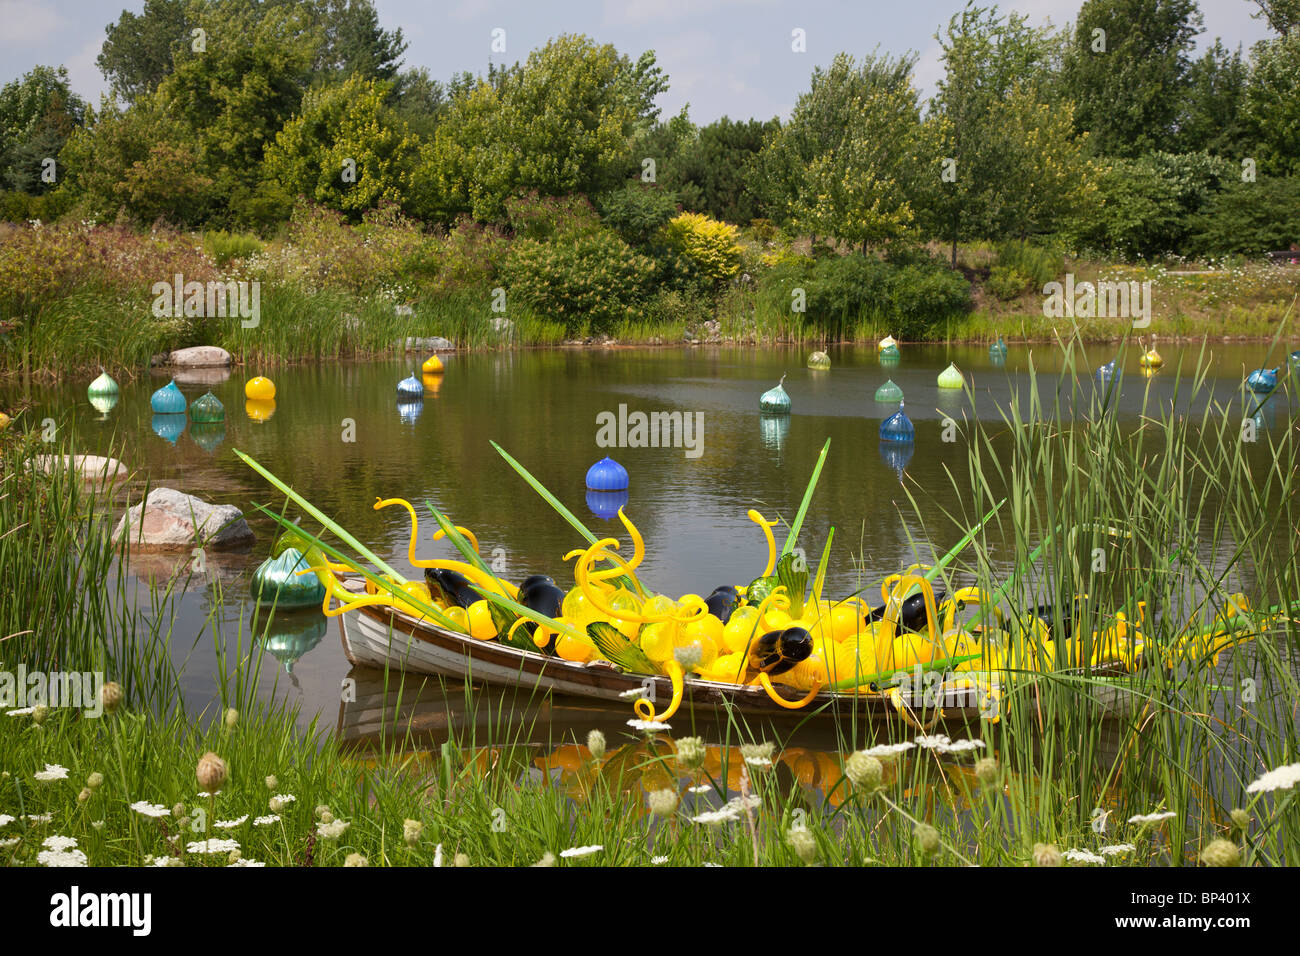 Dale Chihuly's Yellow Boat glass sculpture and floating Walla Wallas on display at the Frederik Meijer Gardens and Sculpture Par Stock Photo